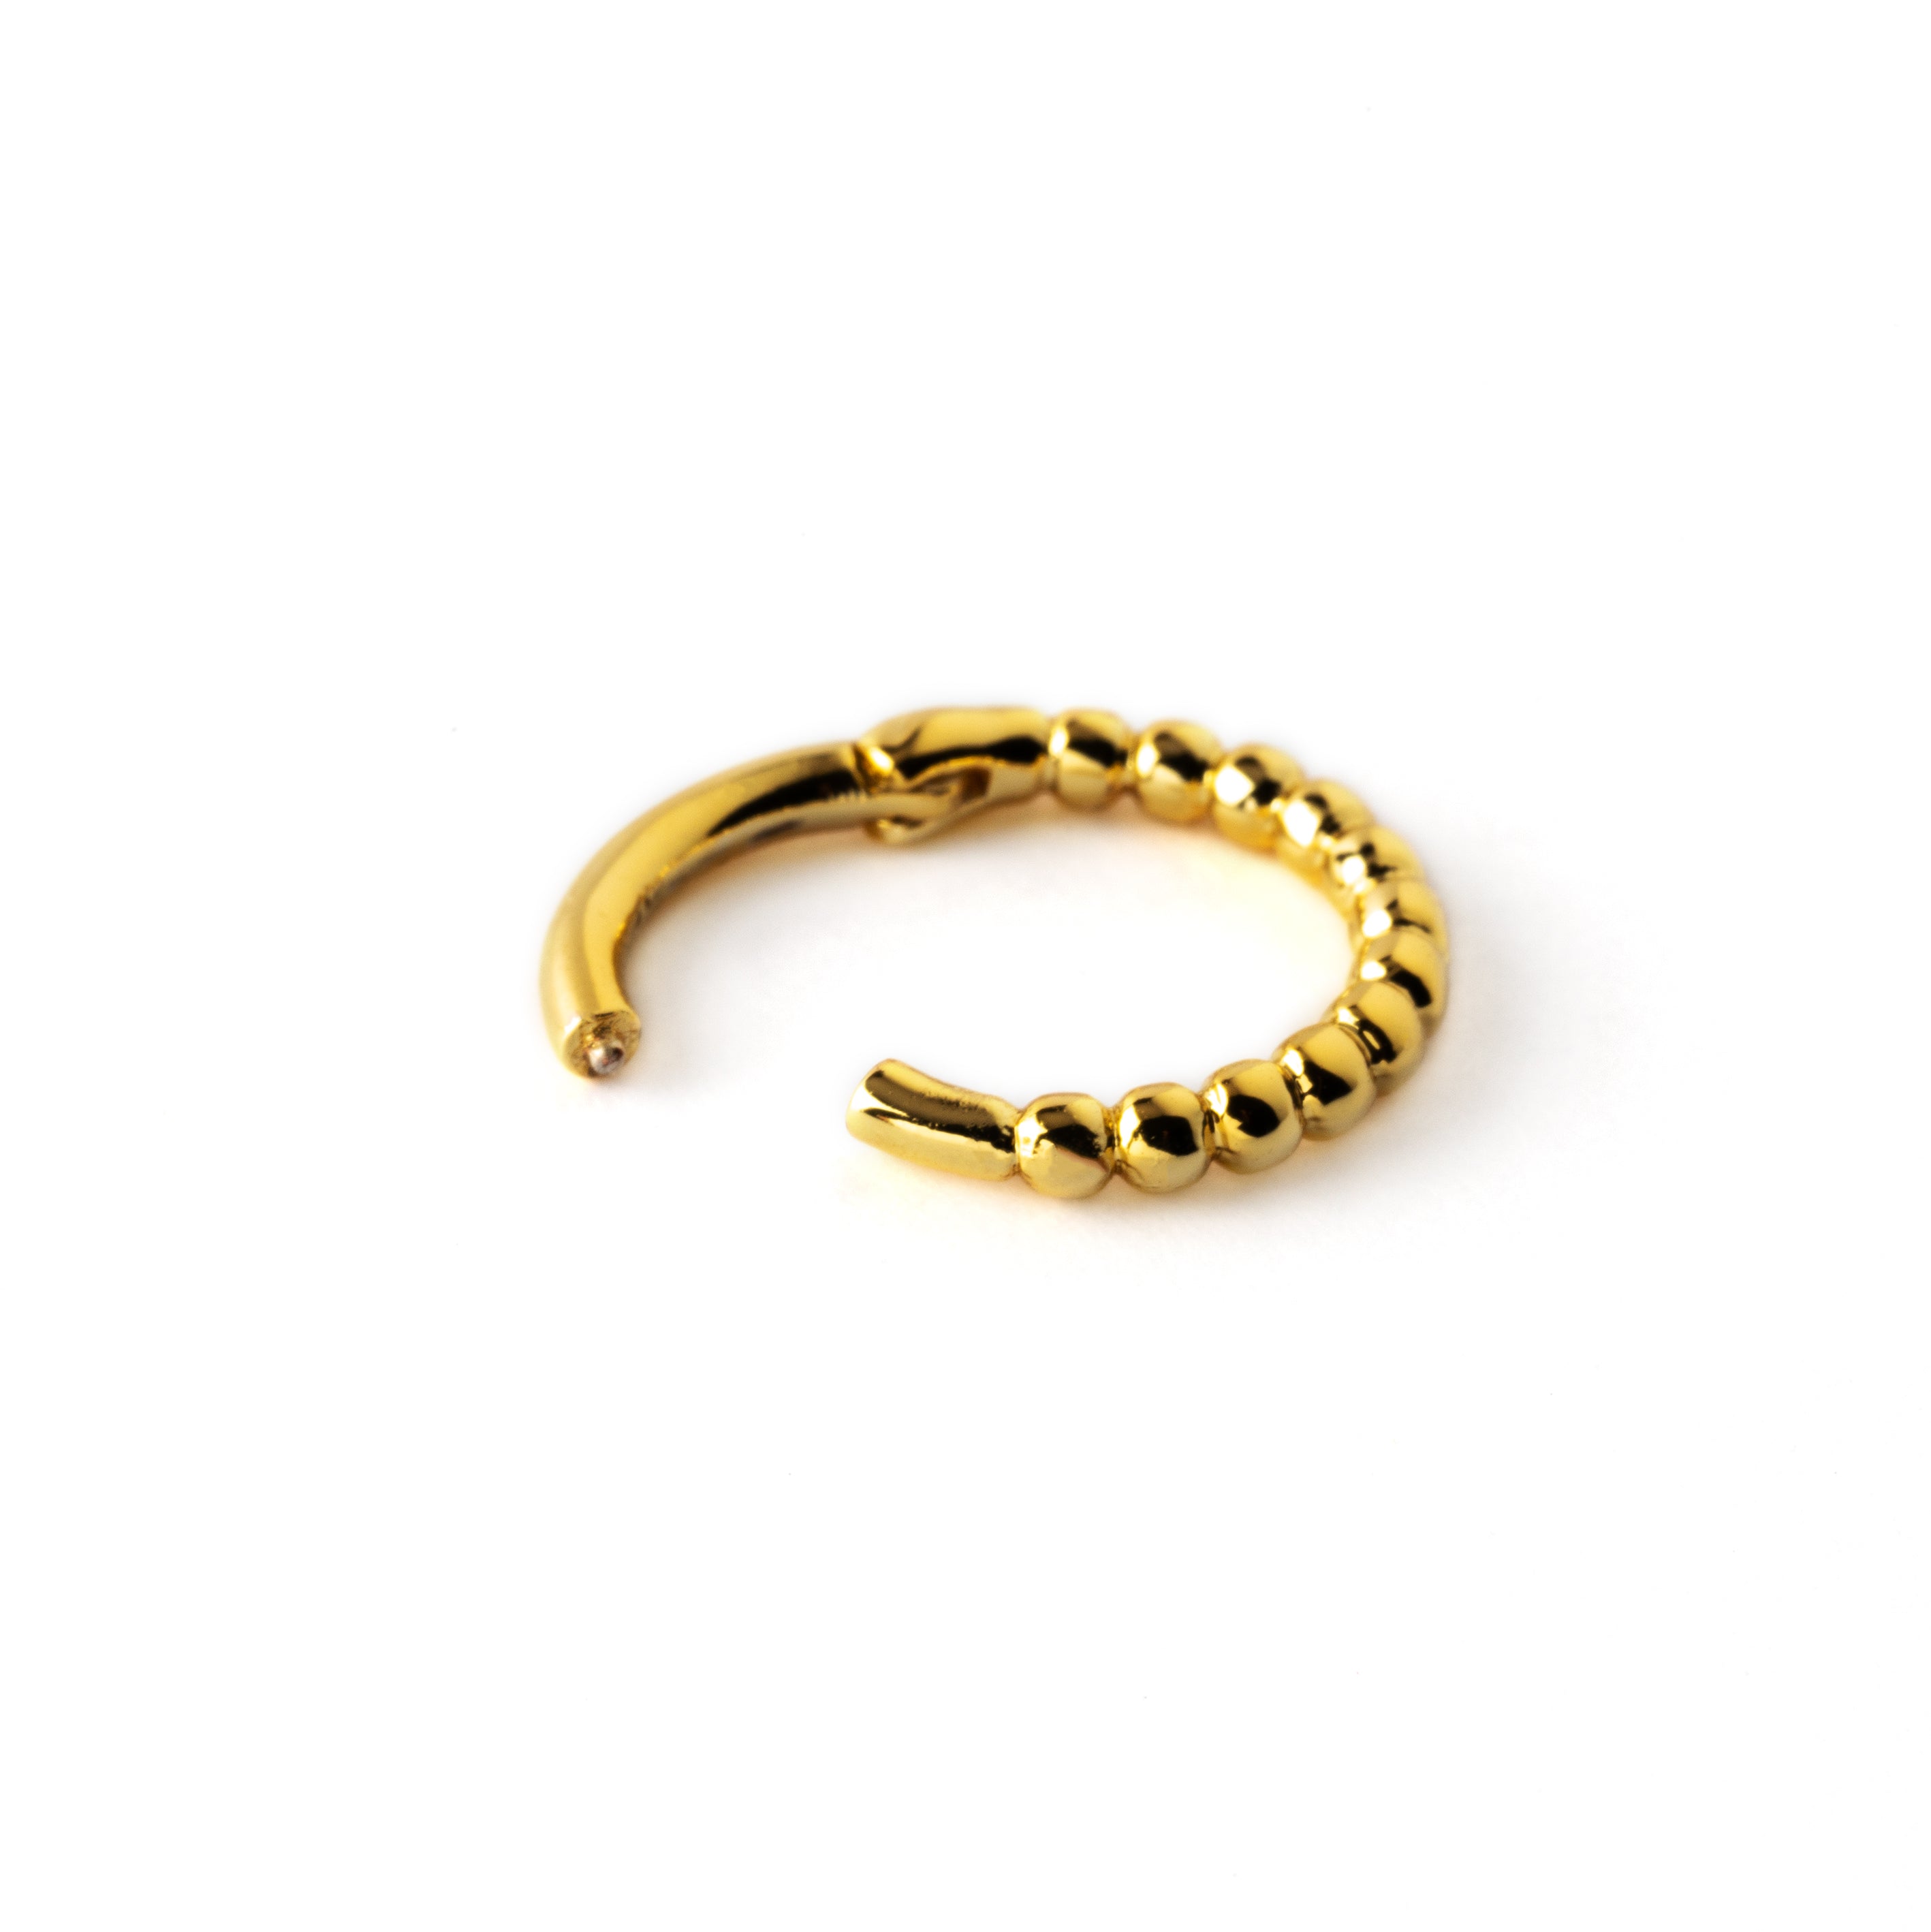 Golden surgical steel dotted piercing clicker ring hinged segment closure